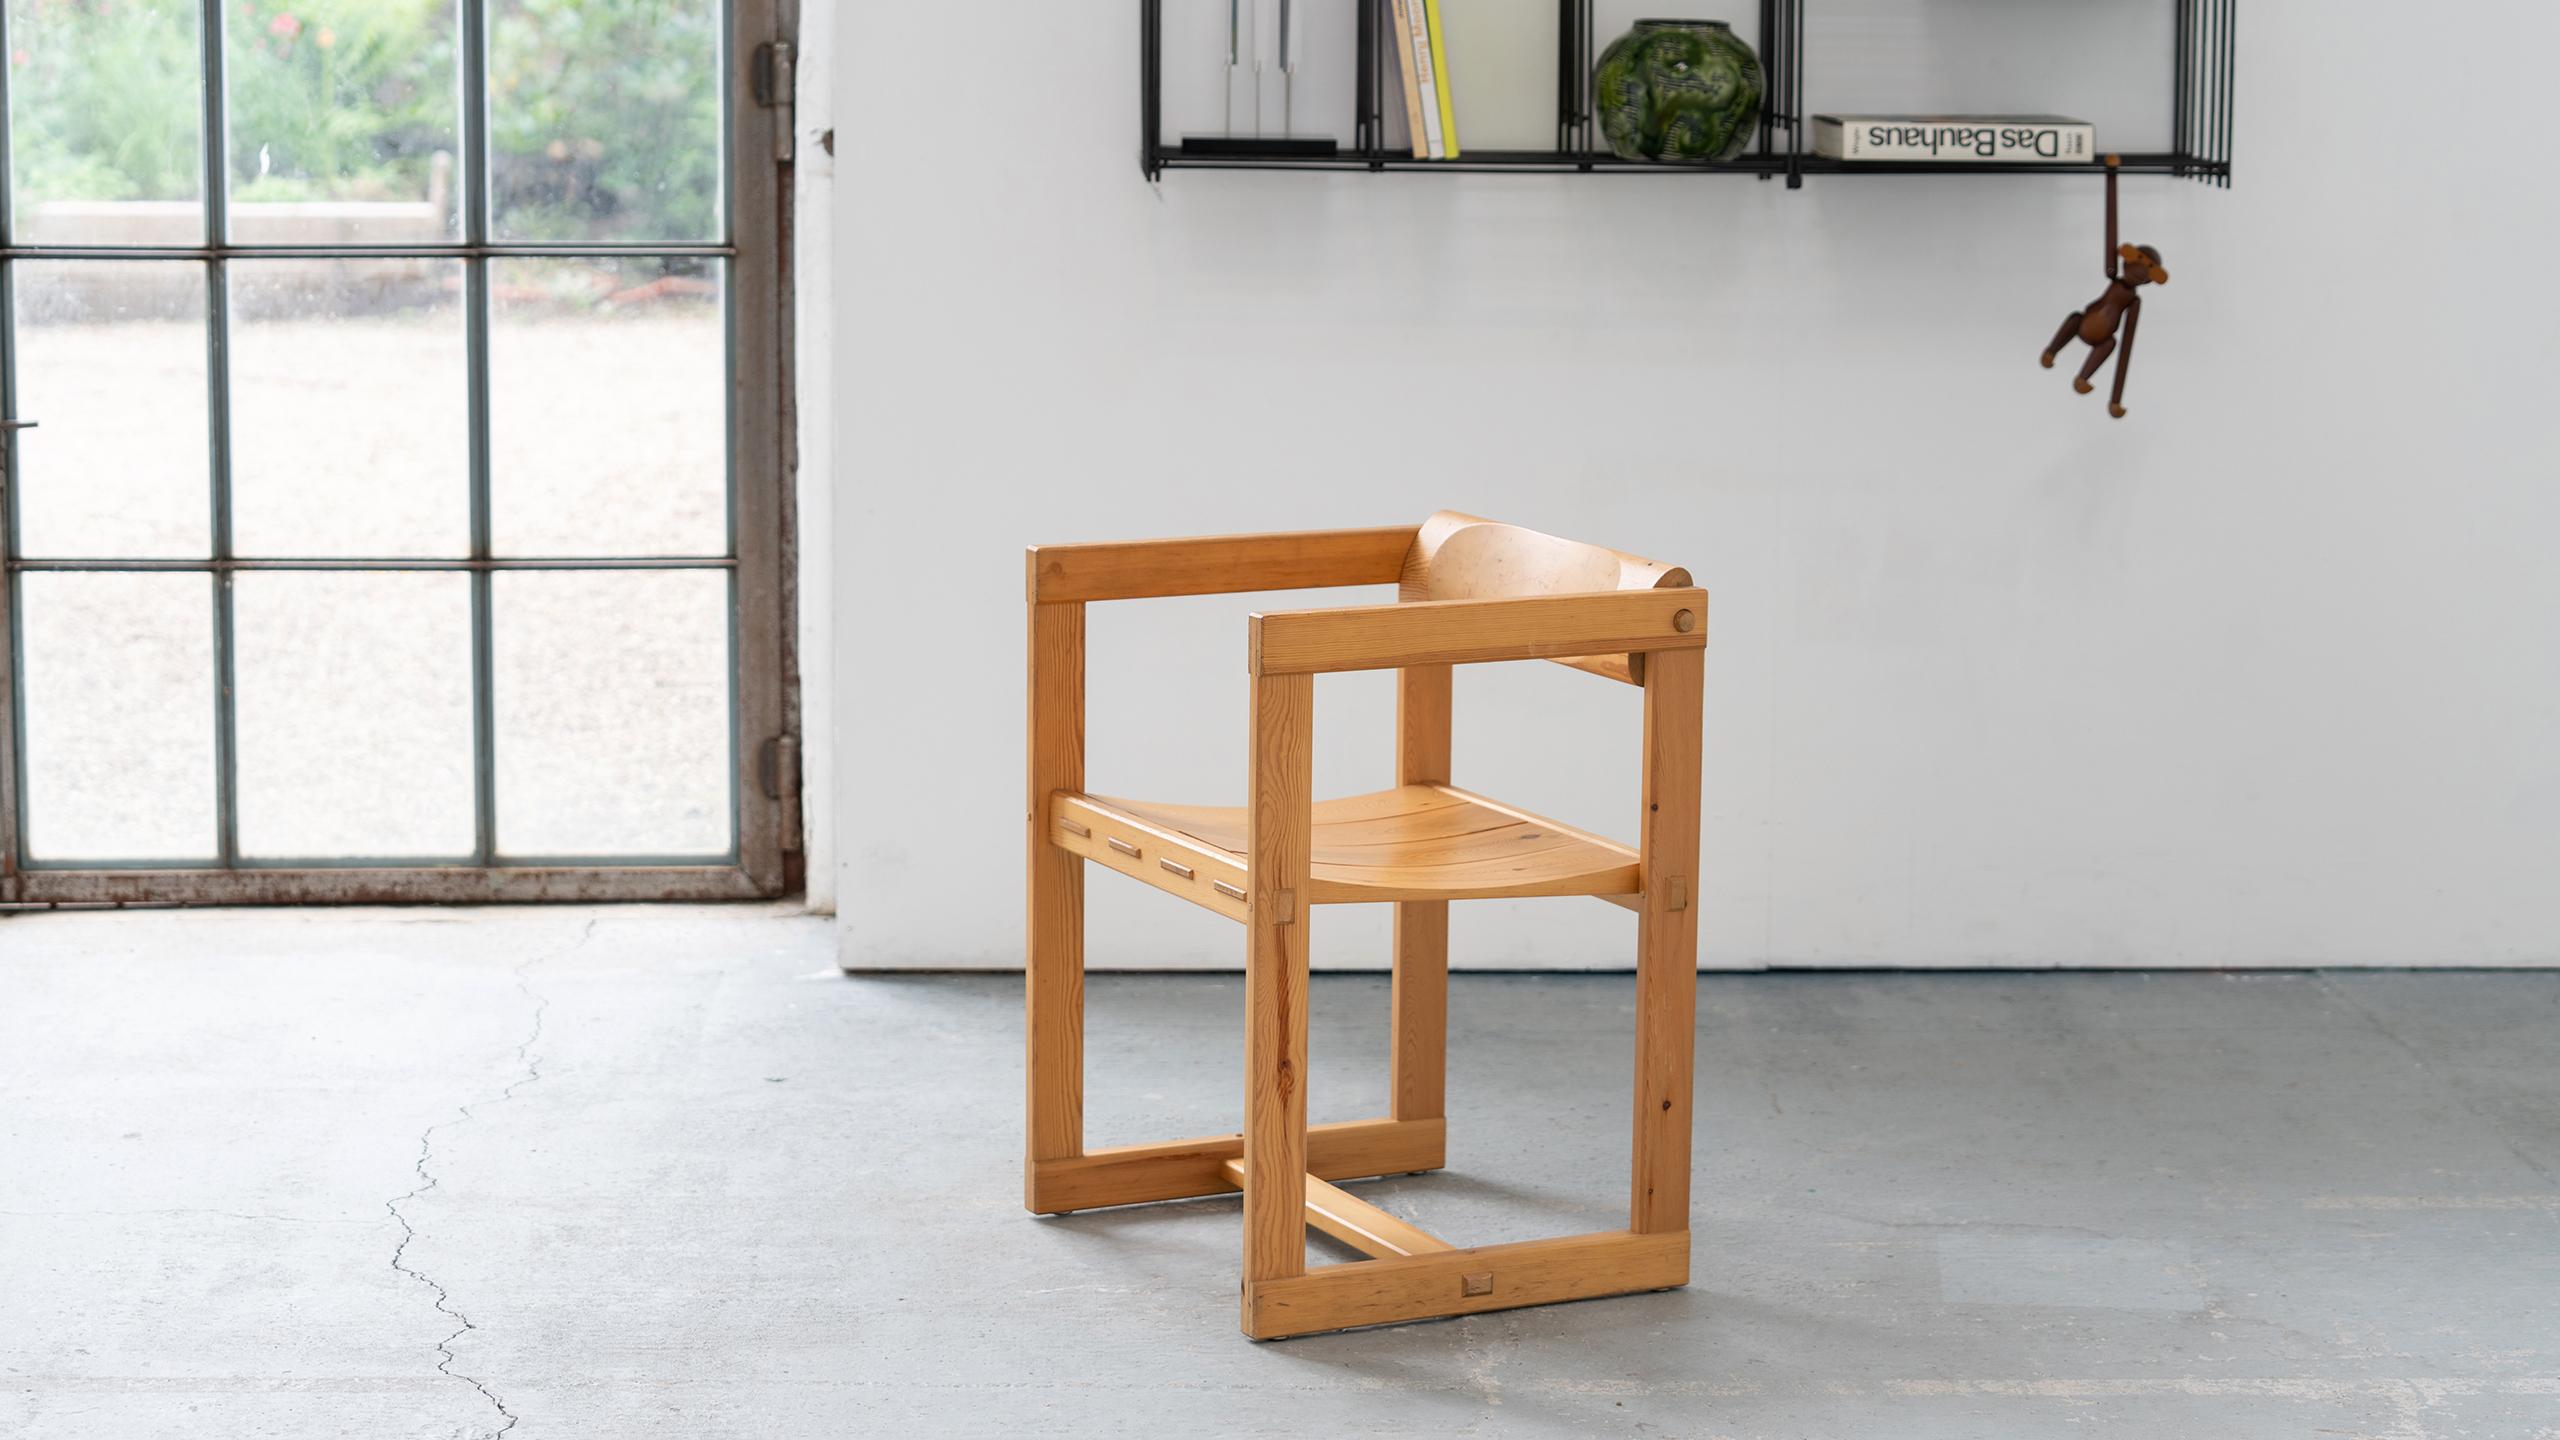 Dining chair in massive pine by Edvin Helseth, 1964 for Trybo Furniture. Made in Norway.

The 